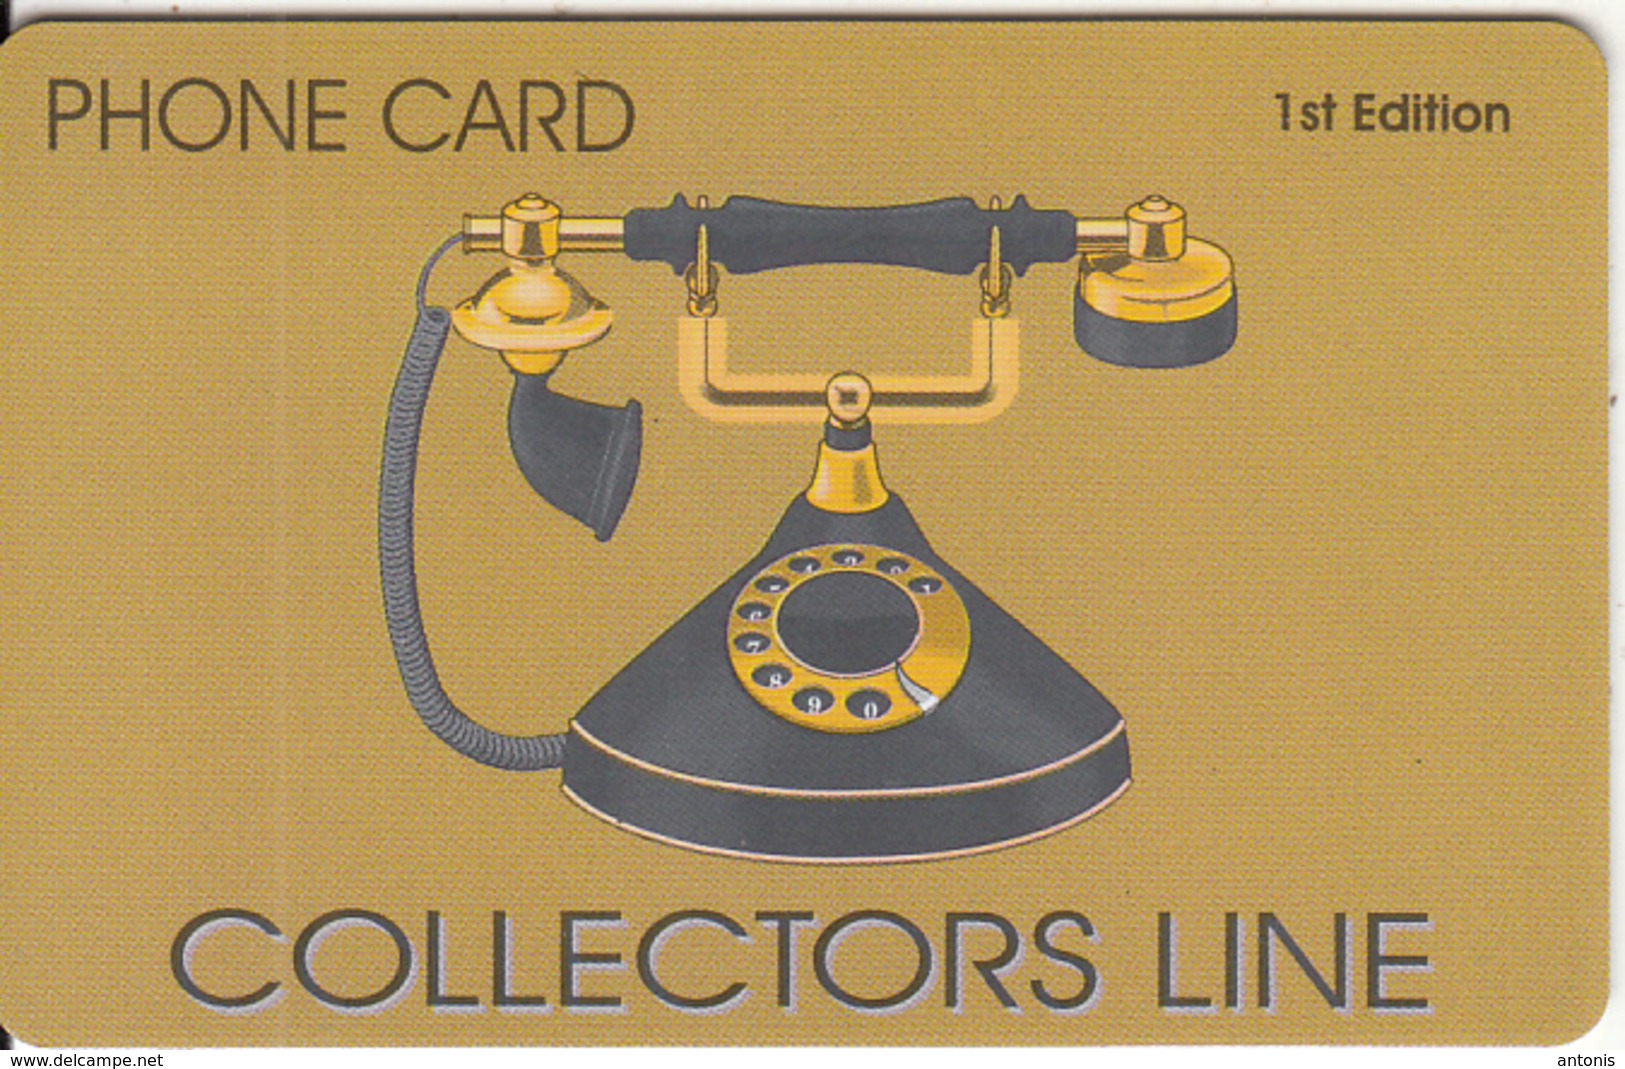 GREECE - Telephone, Collectors Line(1st Edition), Free Fone Promotion Prepaid Card, Tirage 1000, Exp.date 30/05/03, Mint - Greece